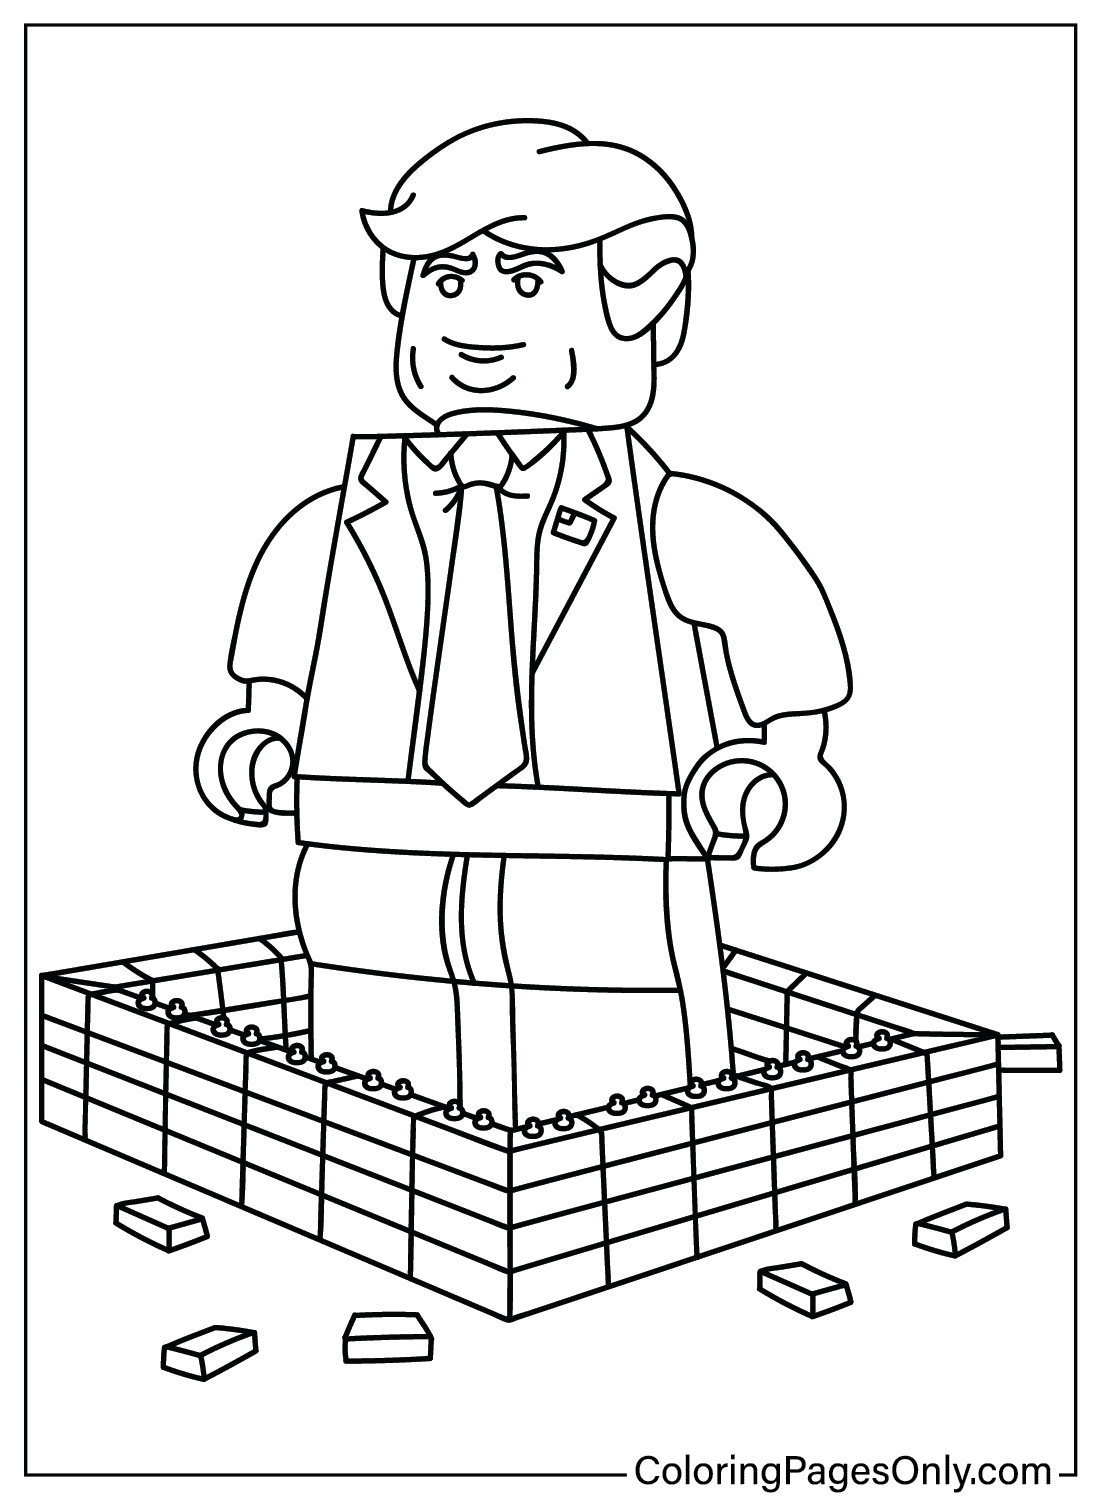 Lego Donald Trump Coloring Page Printable from Donald Trump